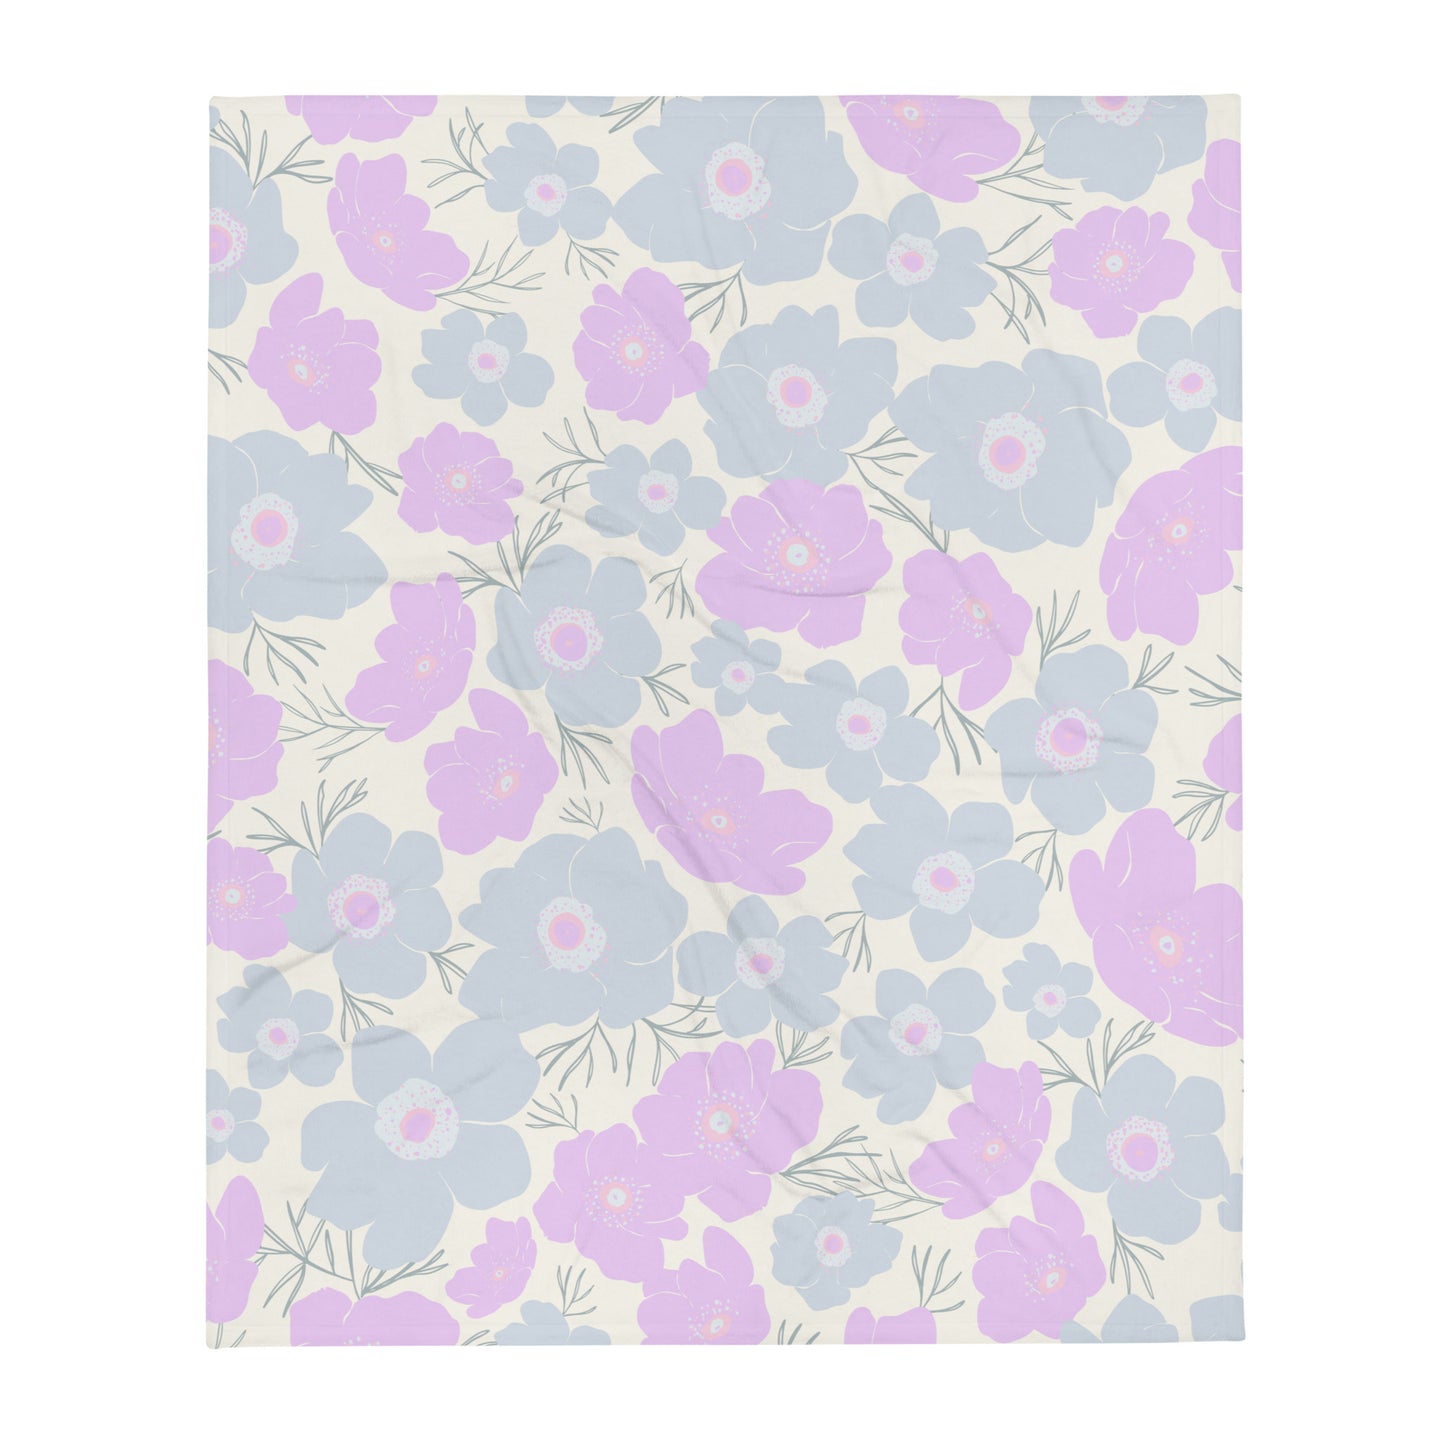 Pastel Floral - Sustainably Made Throw Blanket